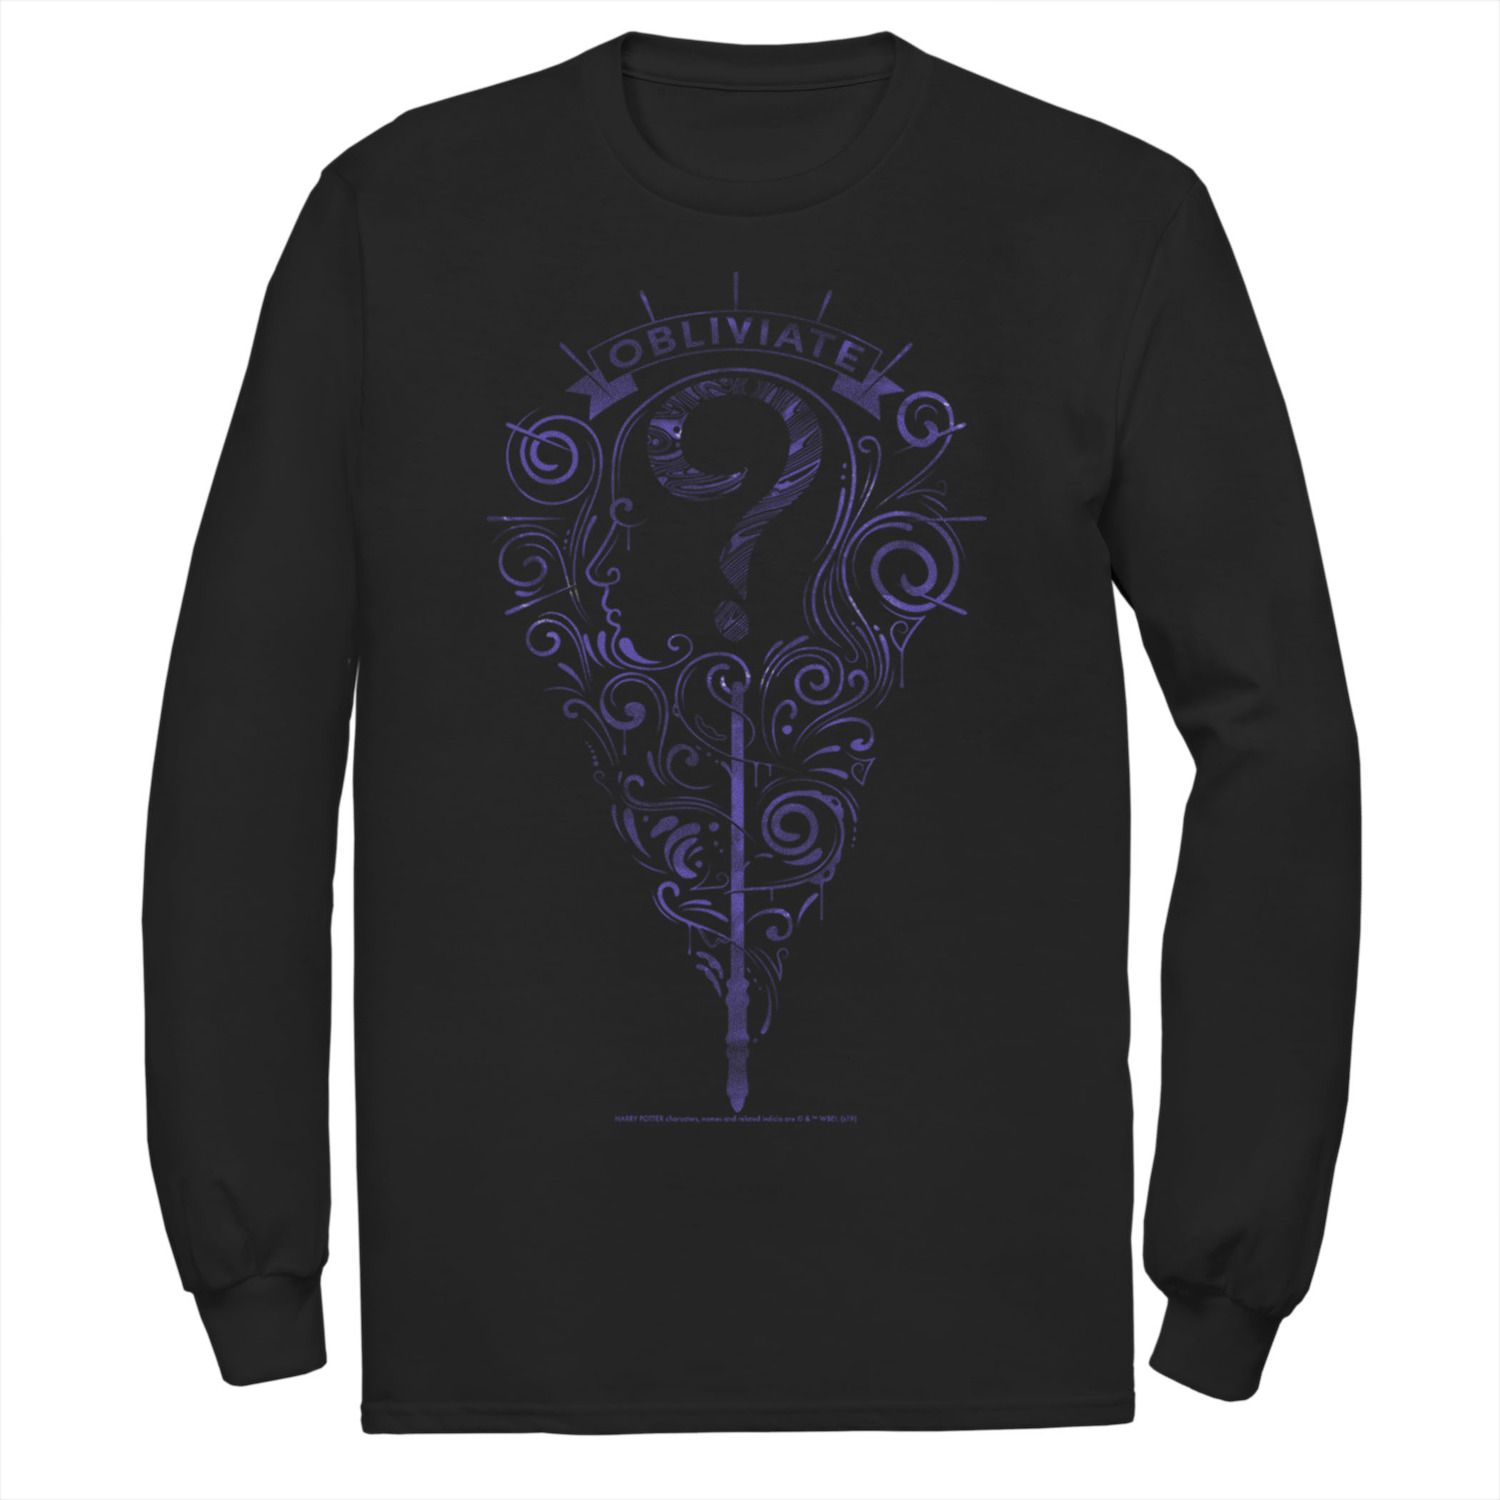 Image for Harry Potter Men's Deathly Hallows 2 Obliviate Long Sleeve Tee at Kohl's.